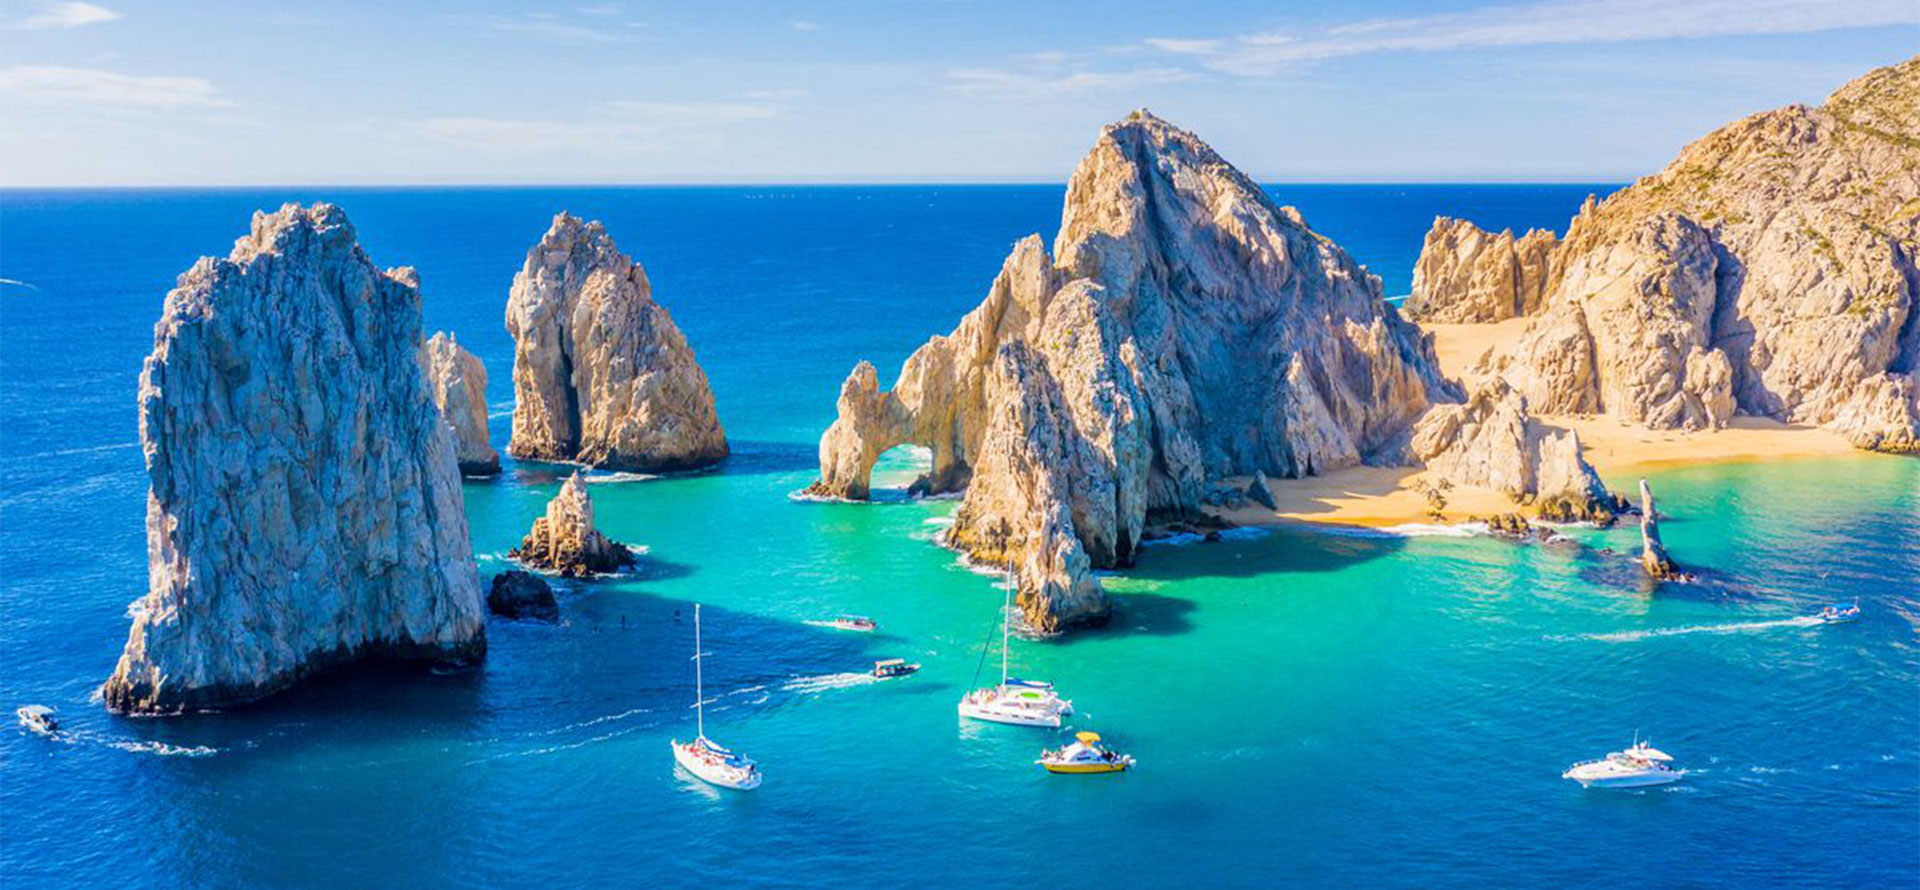 Cabo san lucas beach resorts adults only.